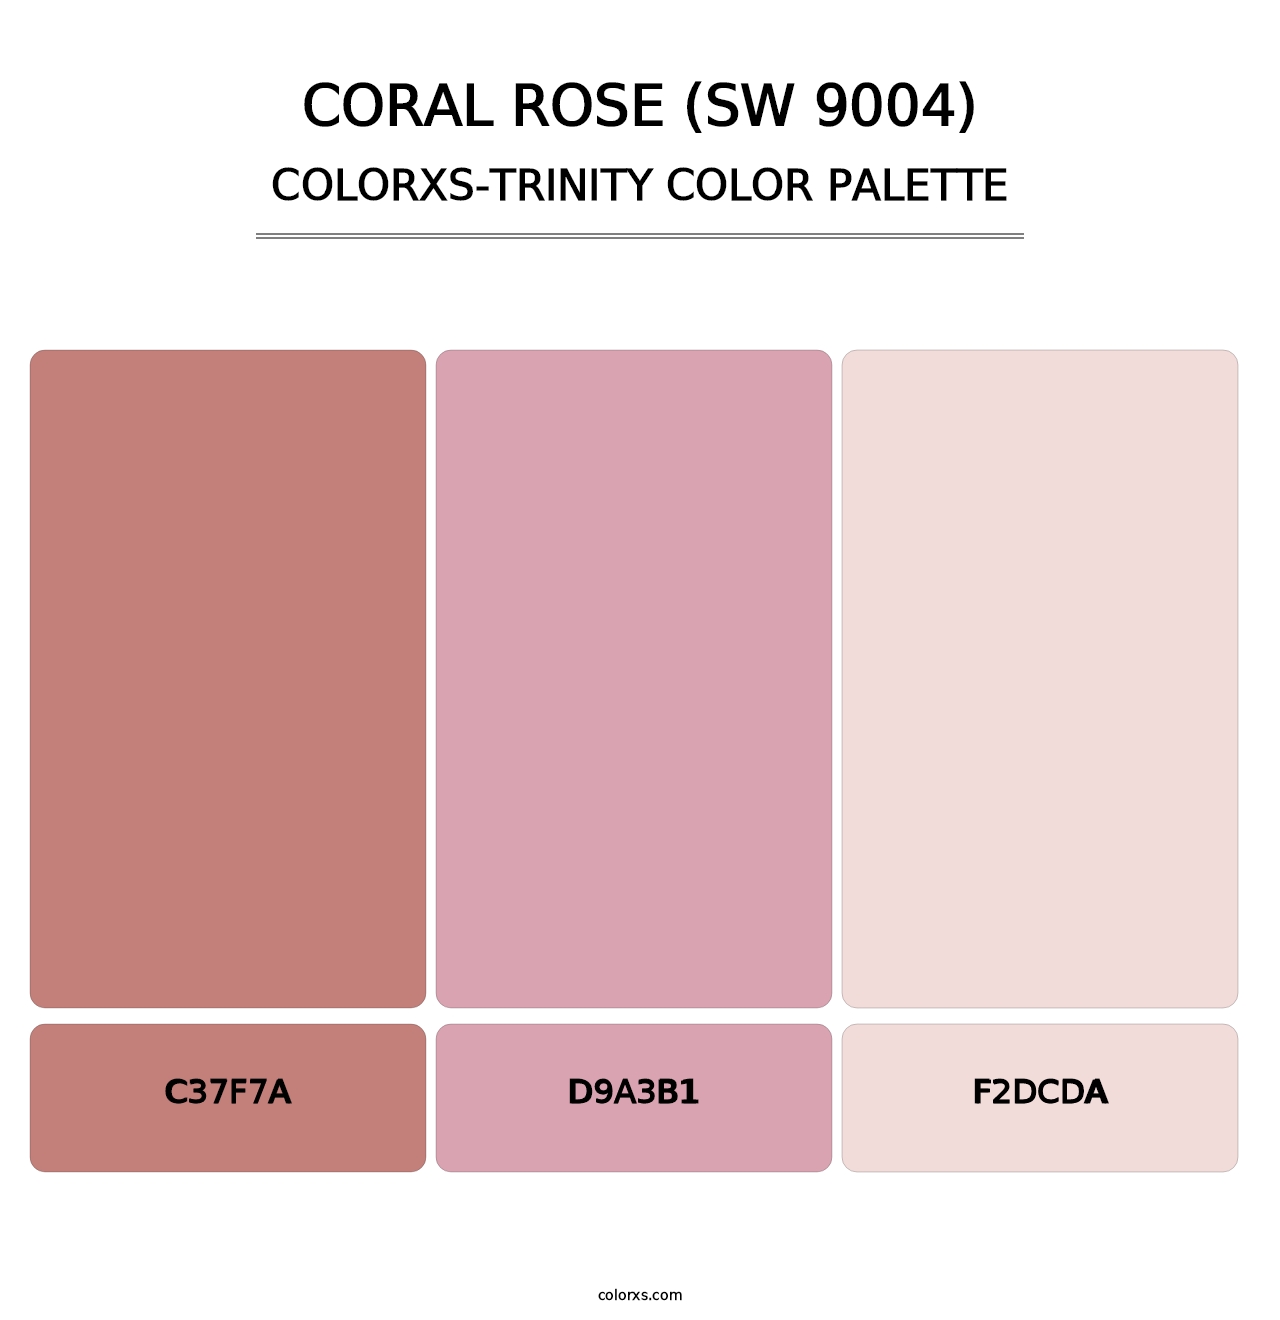 Coral Rose (SW 9004) - Colorxs Trinity Palette